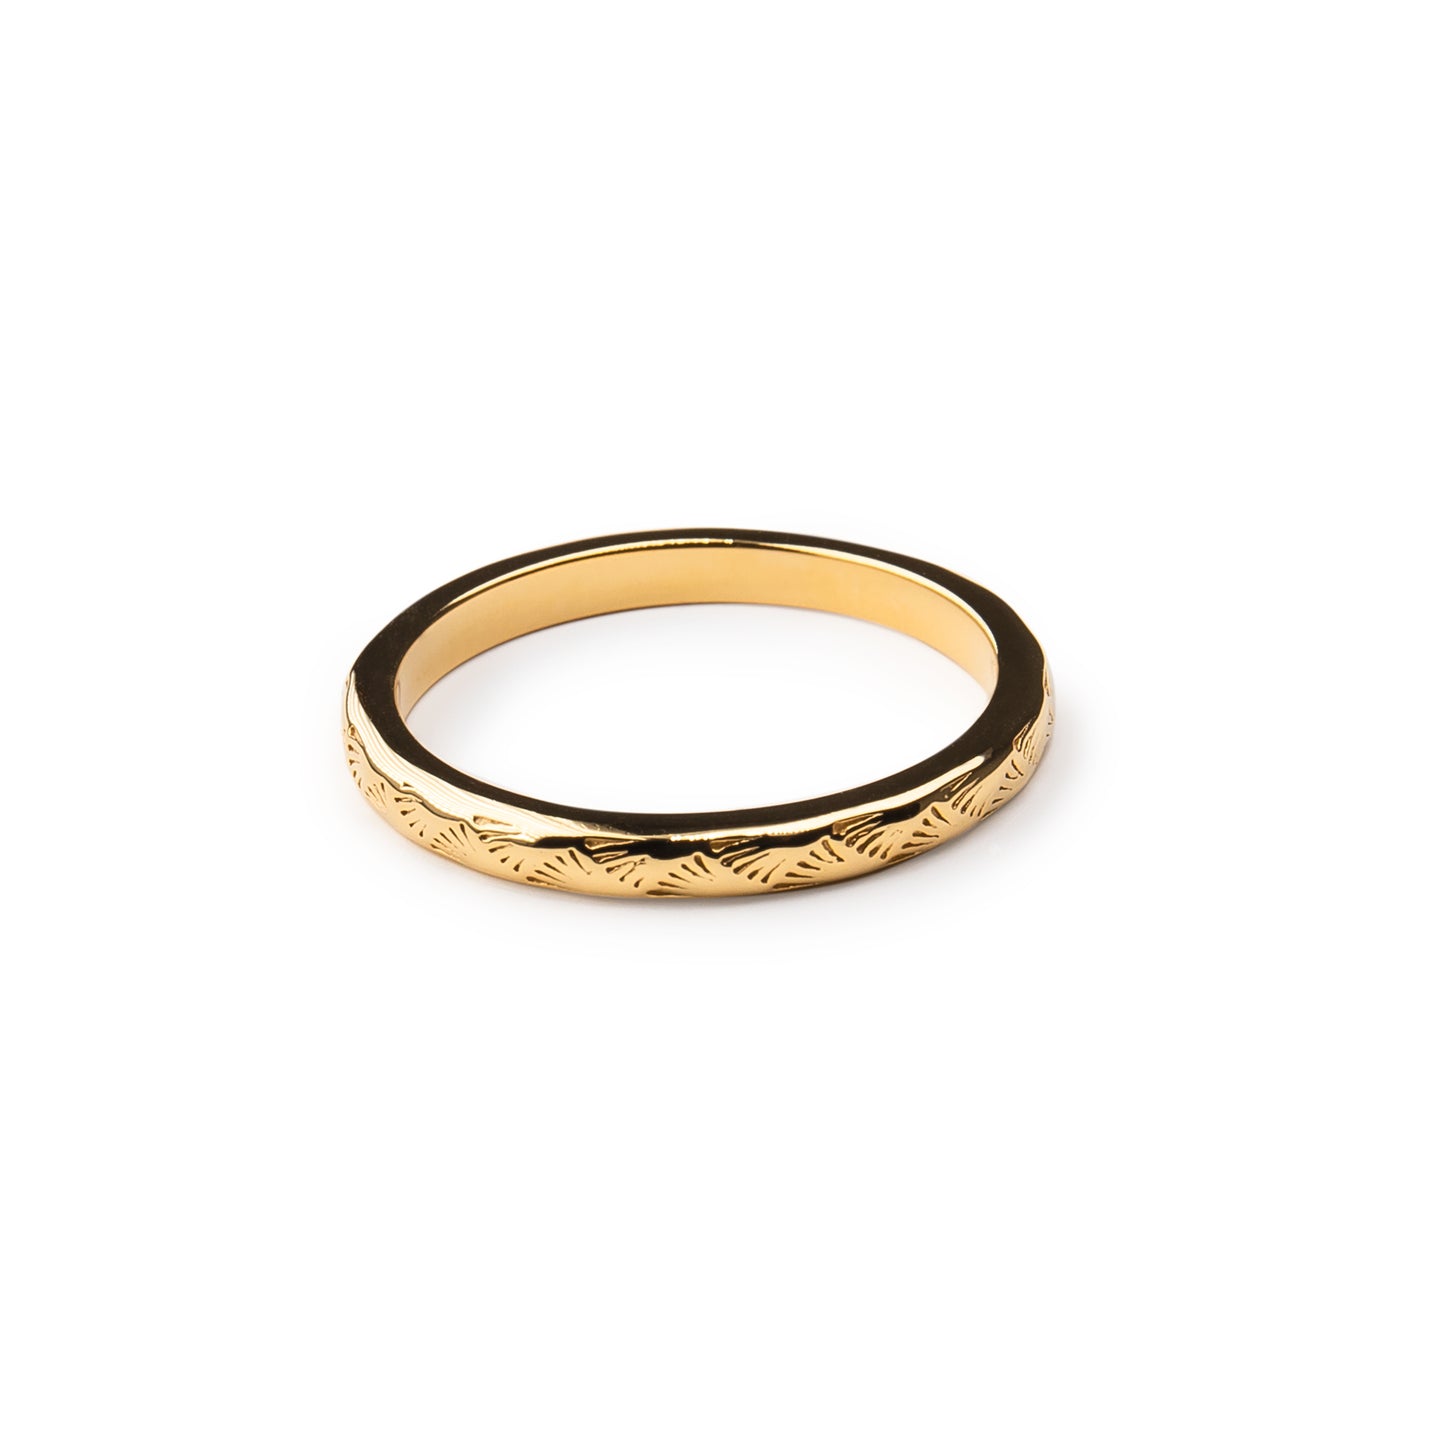 Slim Shell Band Ring in 14K Gold Vermeil